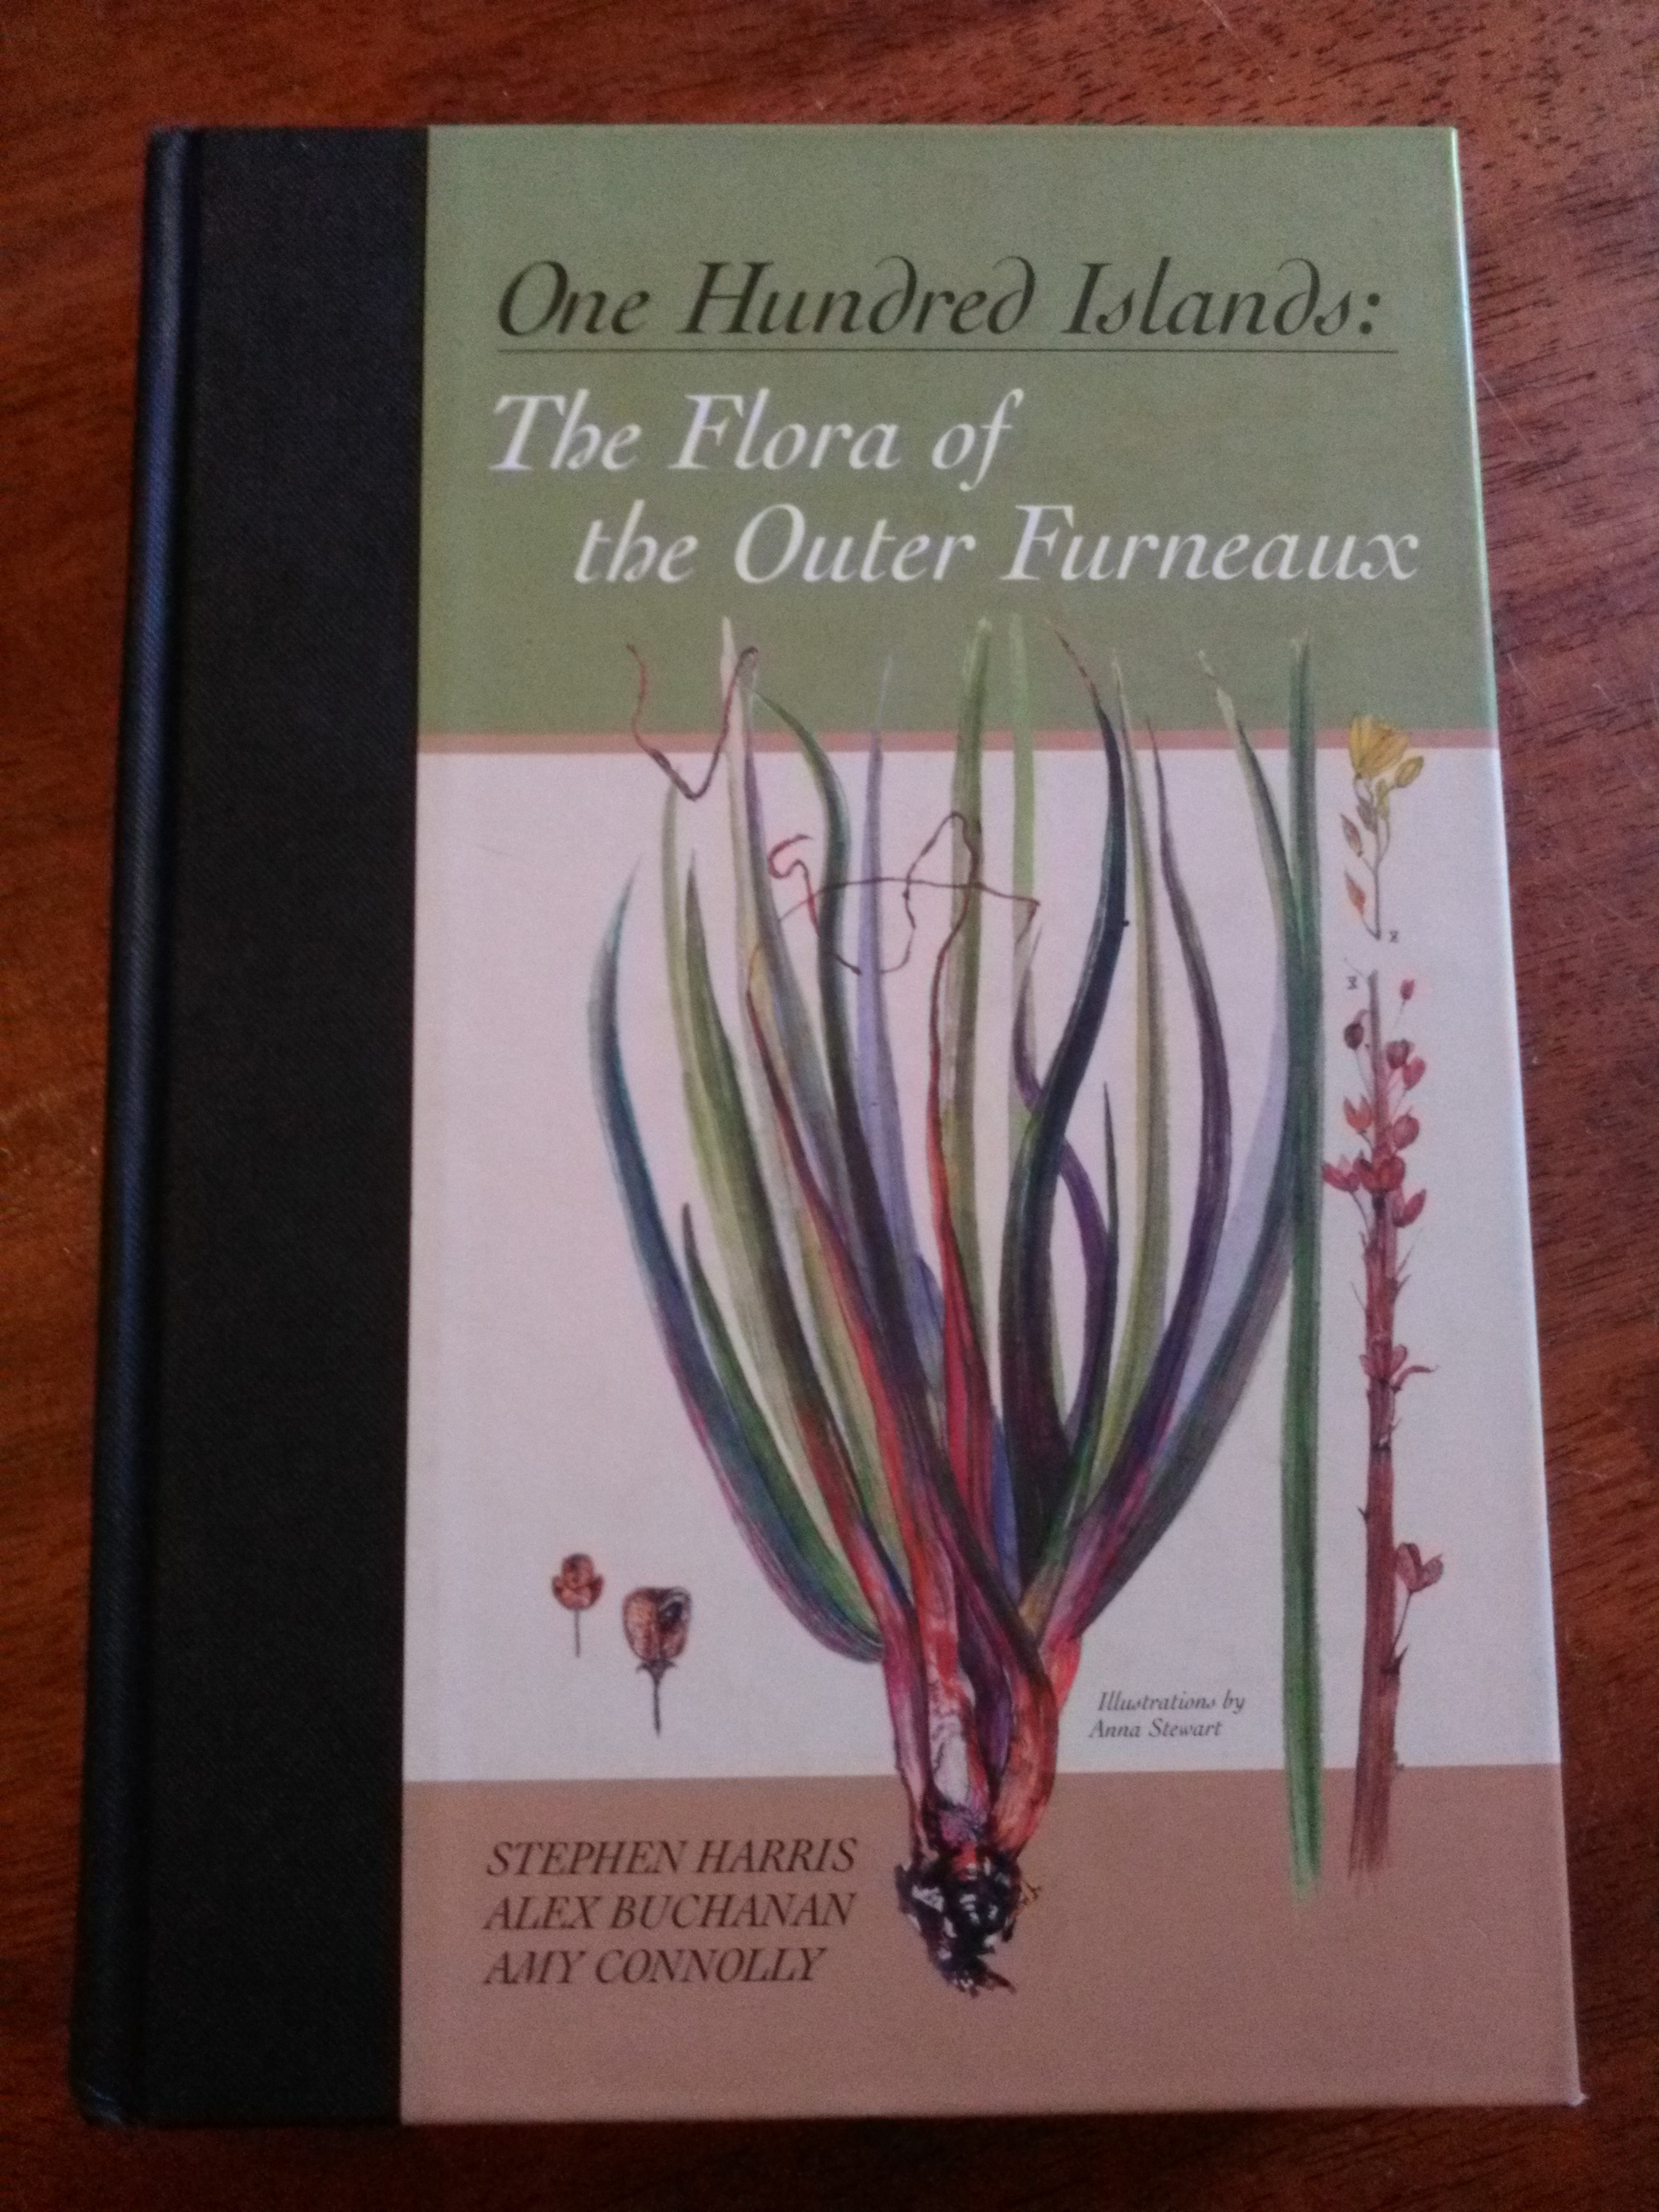 One Hundred Islands - The Flora of the Outer Furneaux